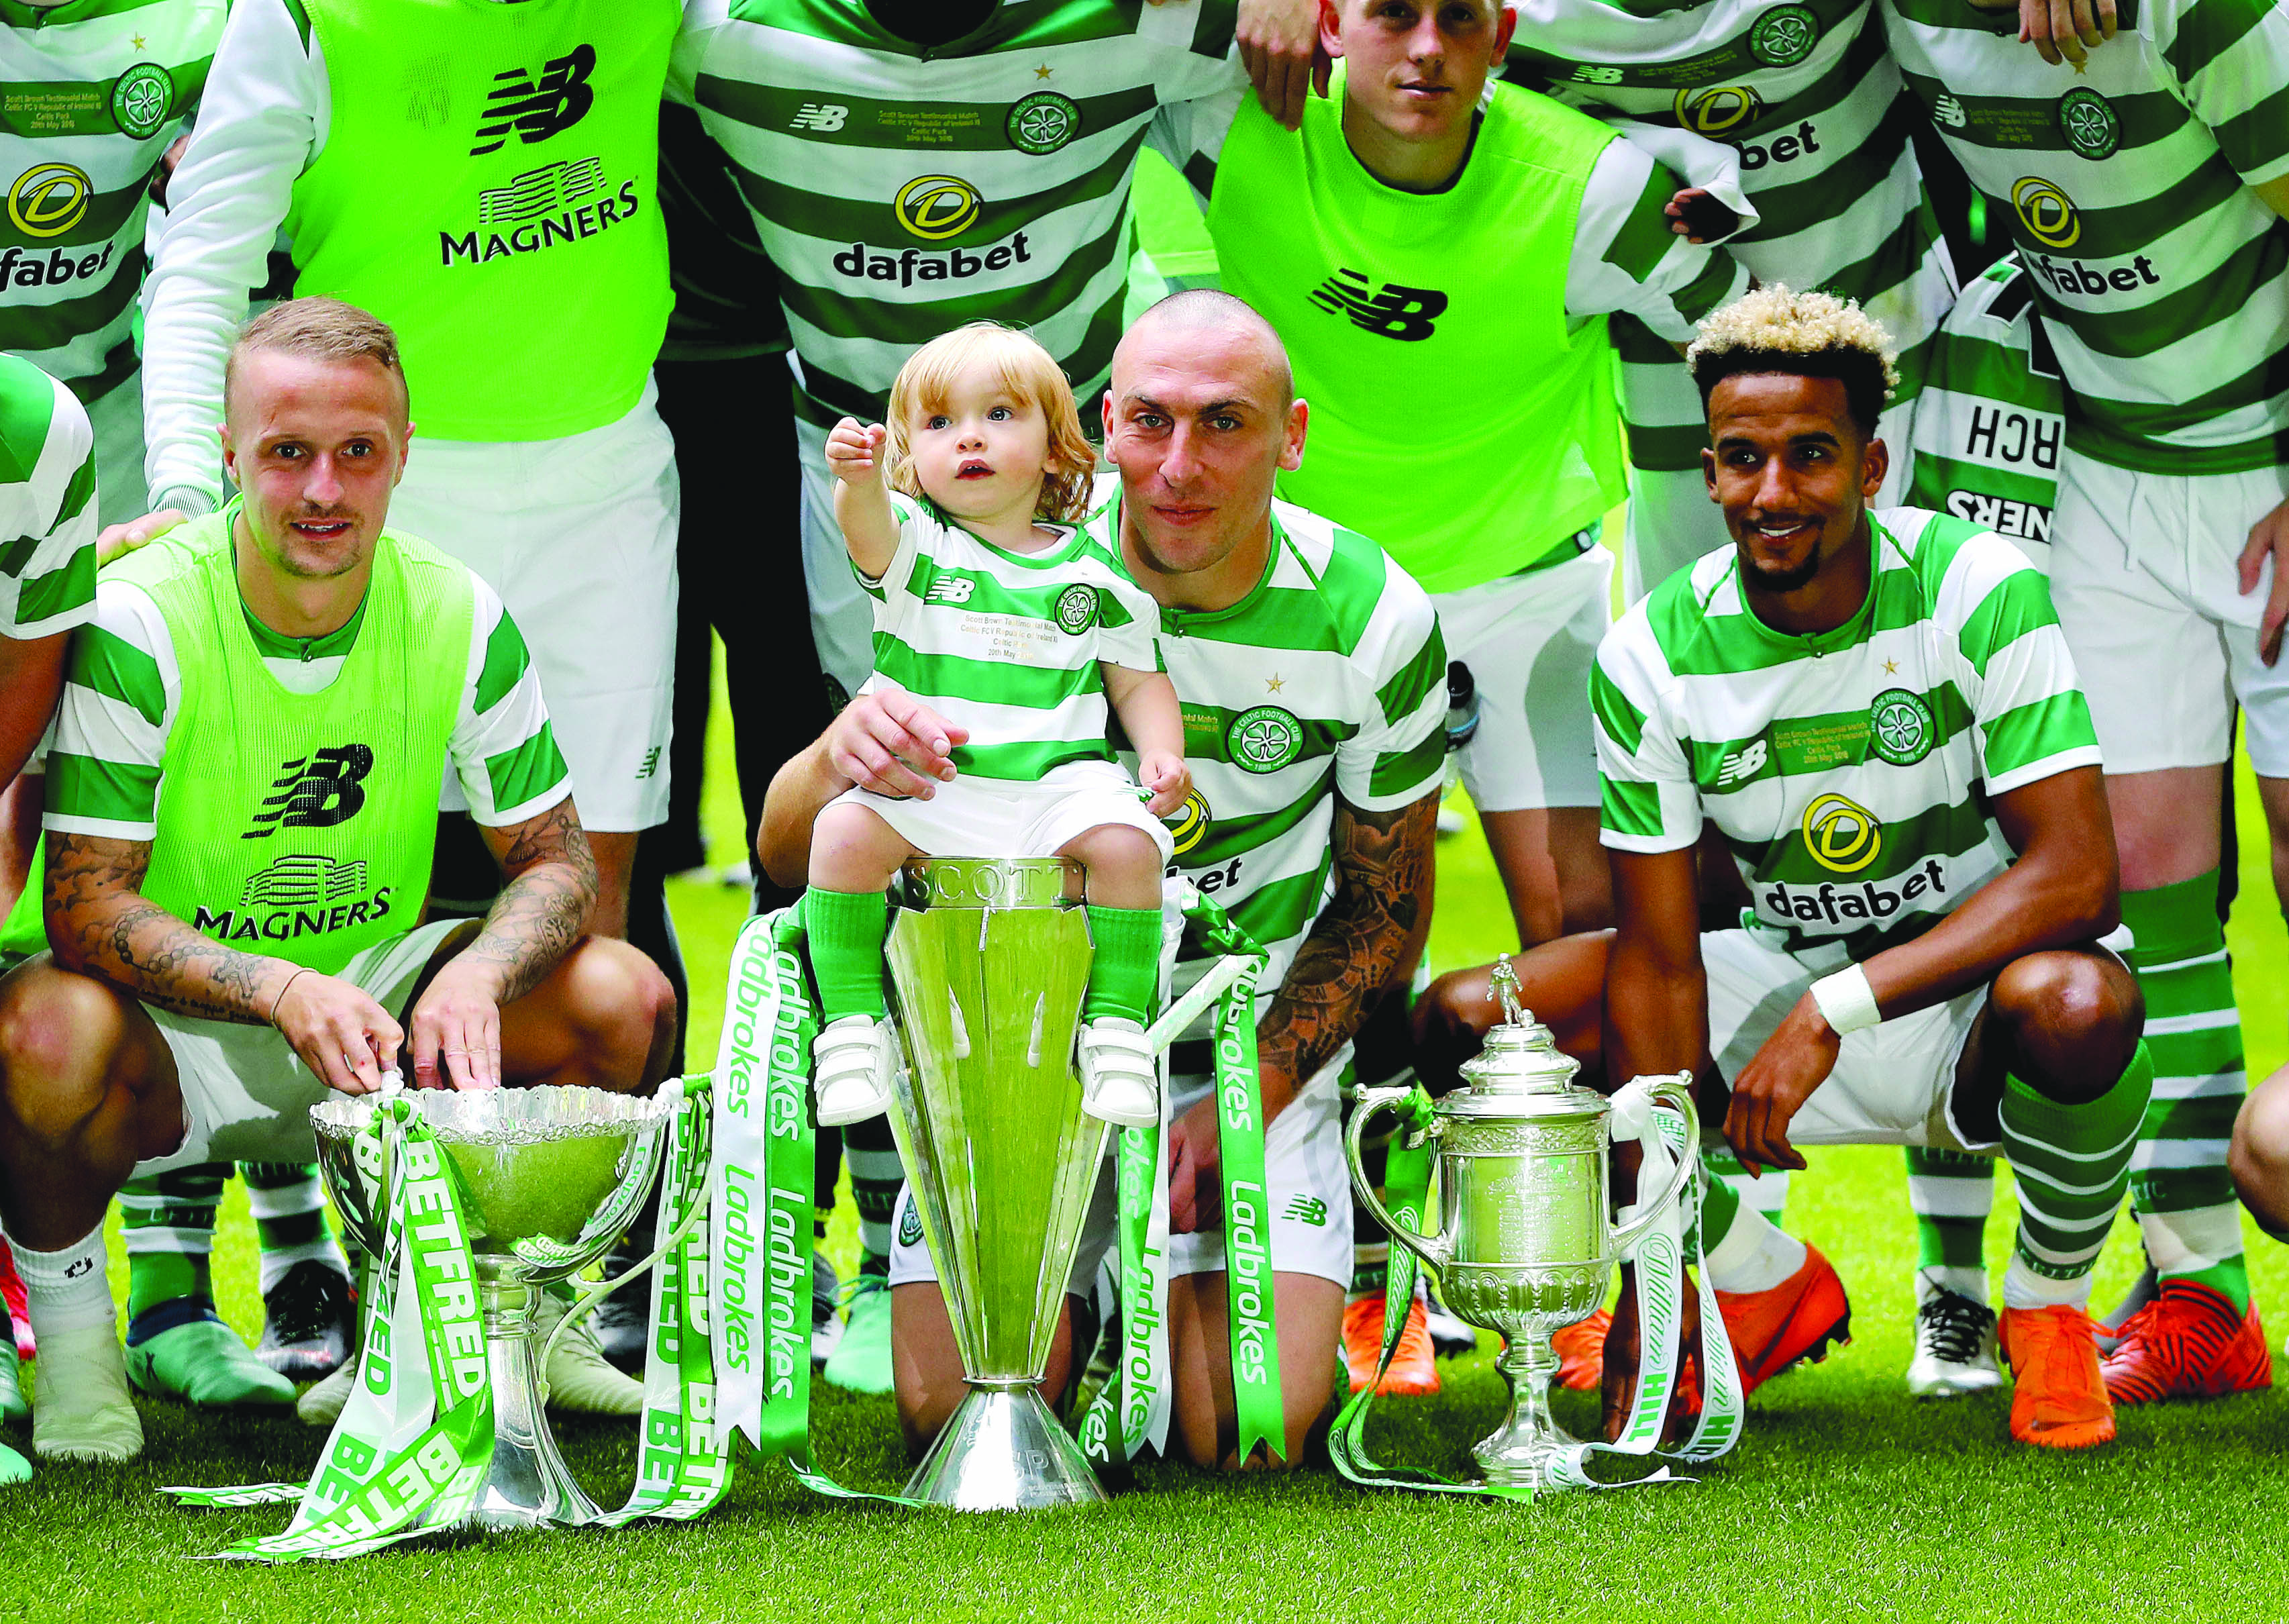 Celtic fans had grown accustomed to their team winning all on offer in Scottish football, but in the space of a few weeks the Premiership title and League Cup have found new homes, prompting the need for a huge rebuild at the club in terms of players and 